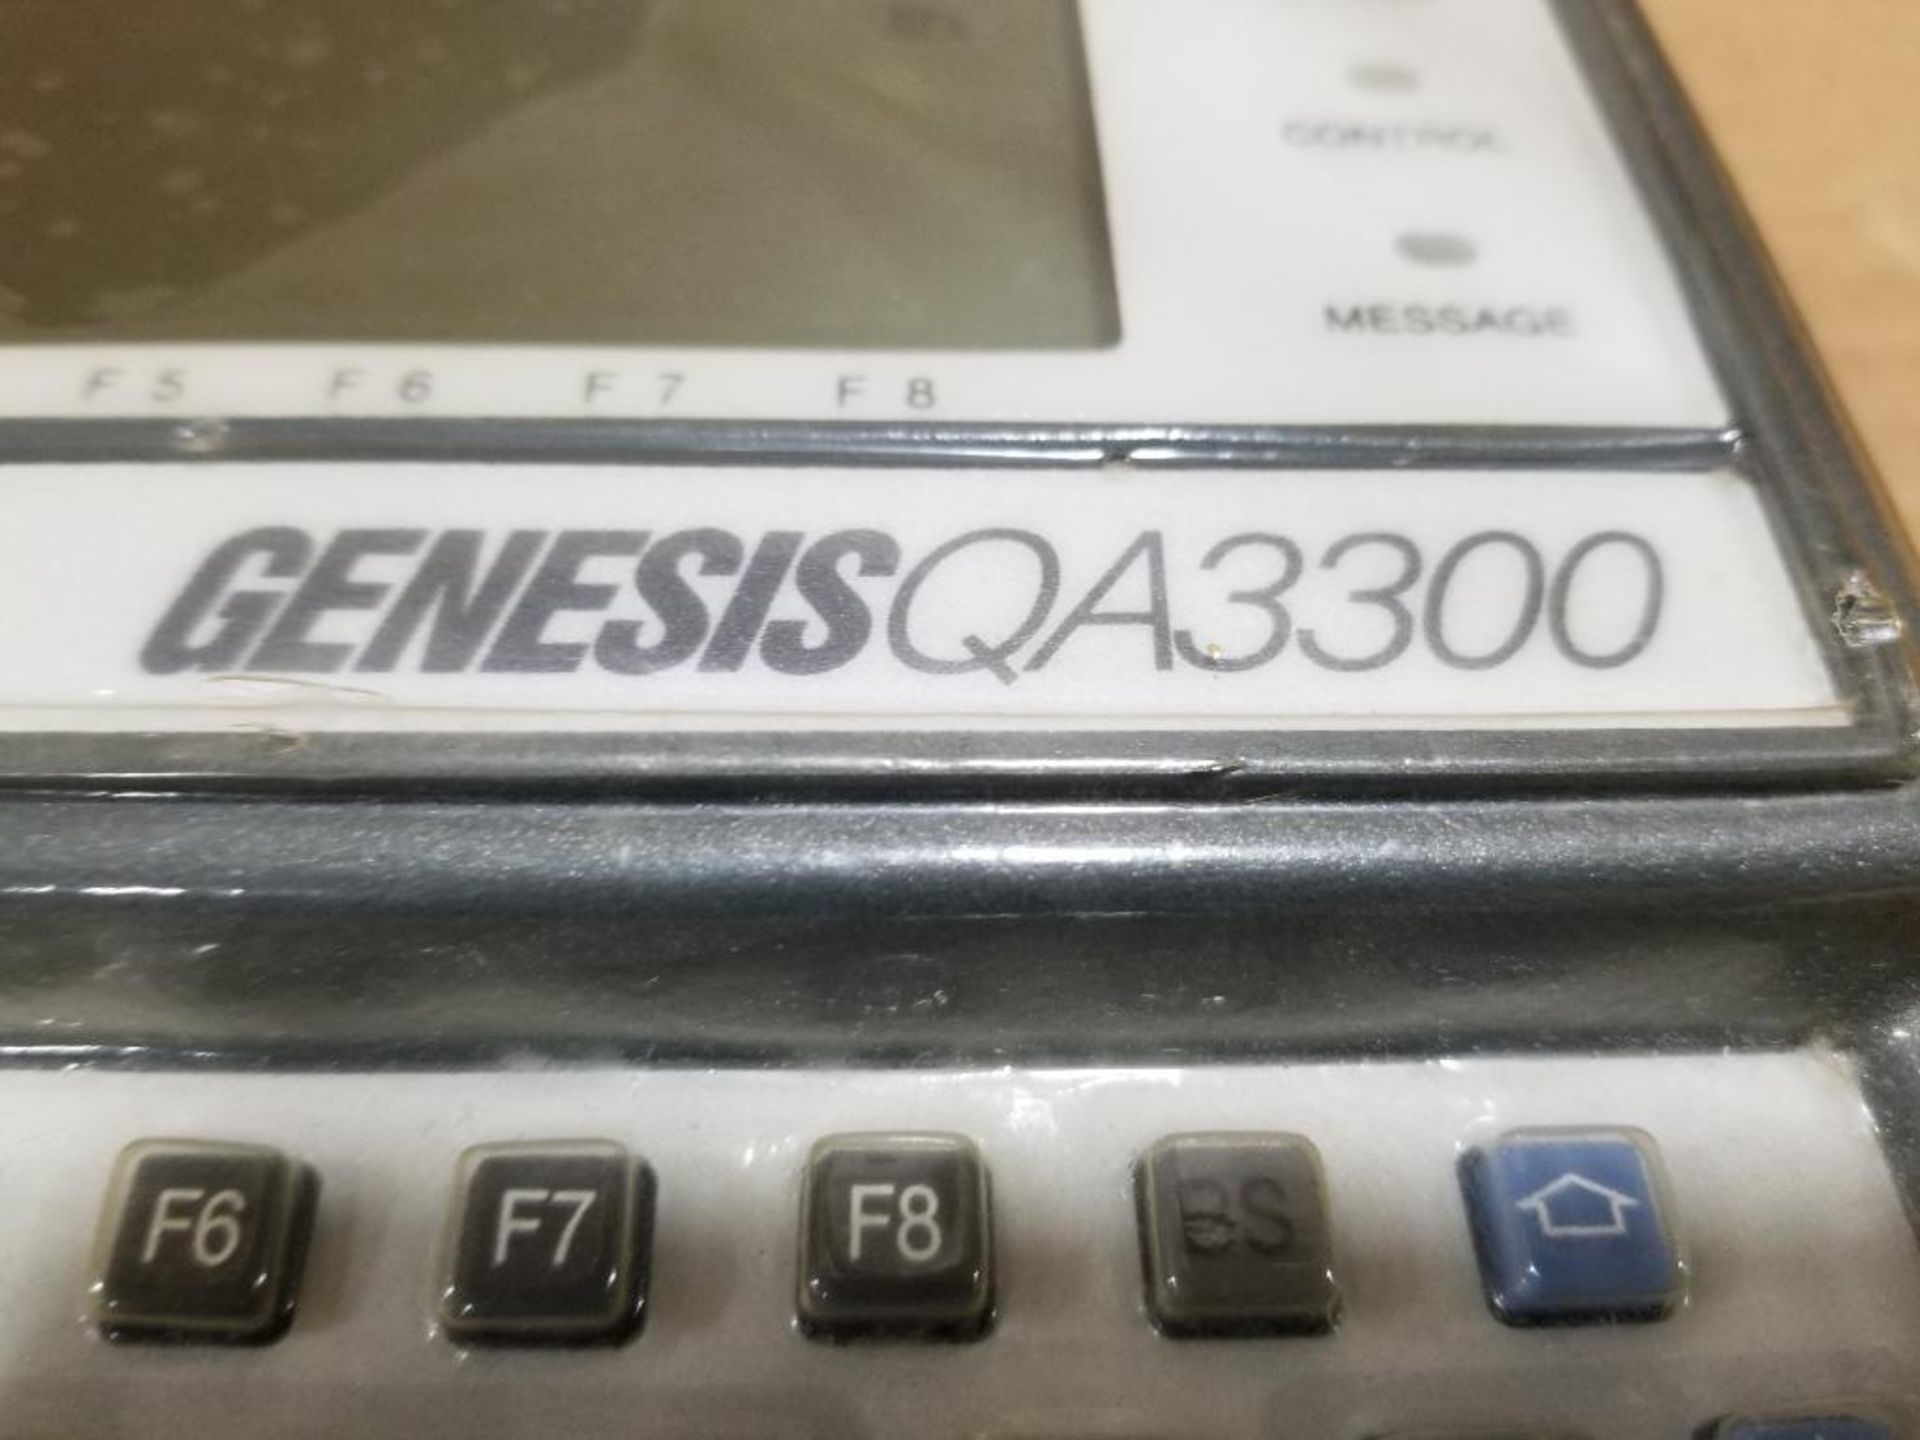 Qty 2 - Quality Measurement Systems controller. Part number Genesis QA3300. - Image 2 of 9